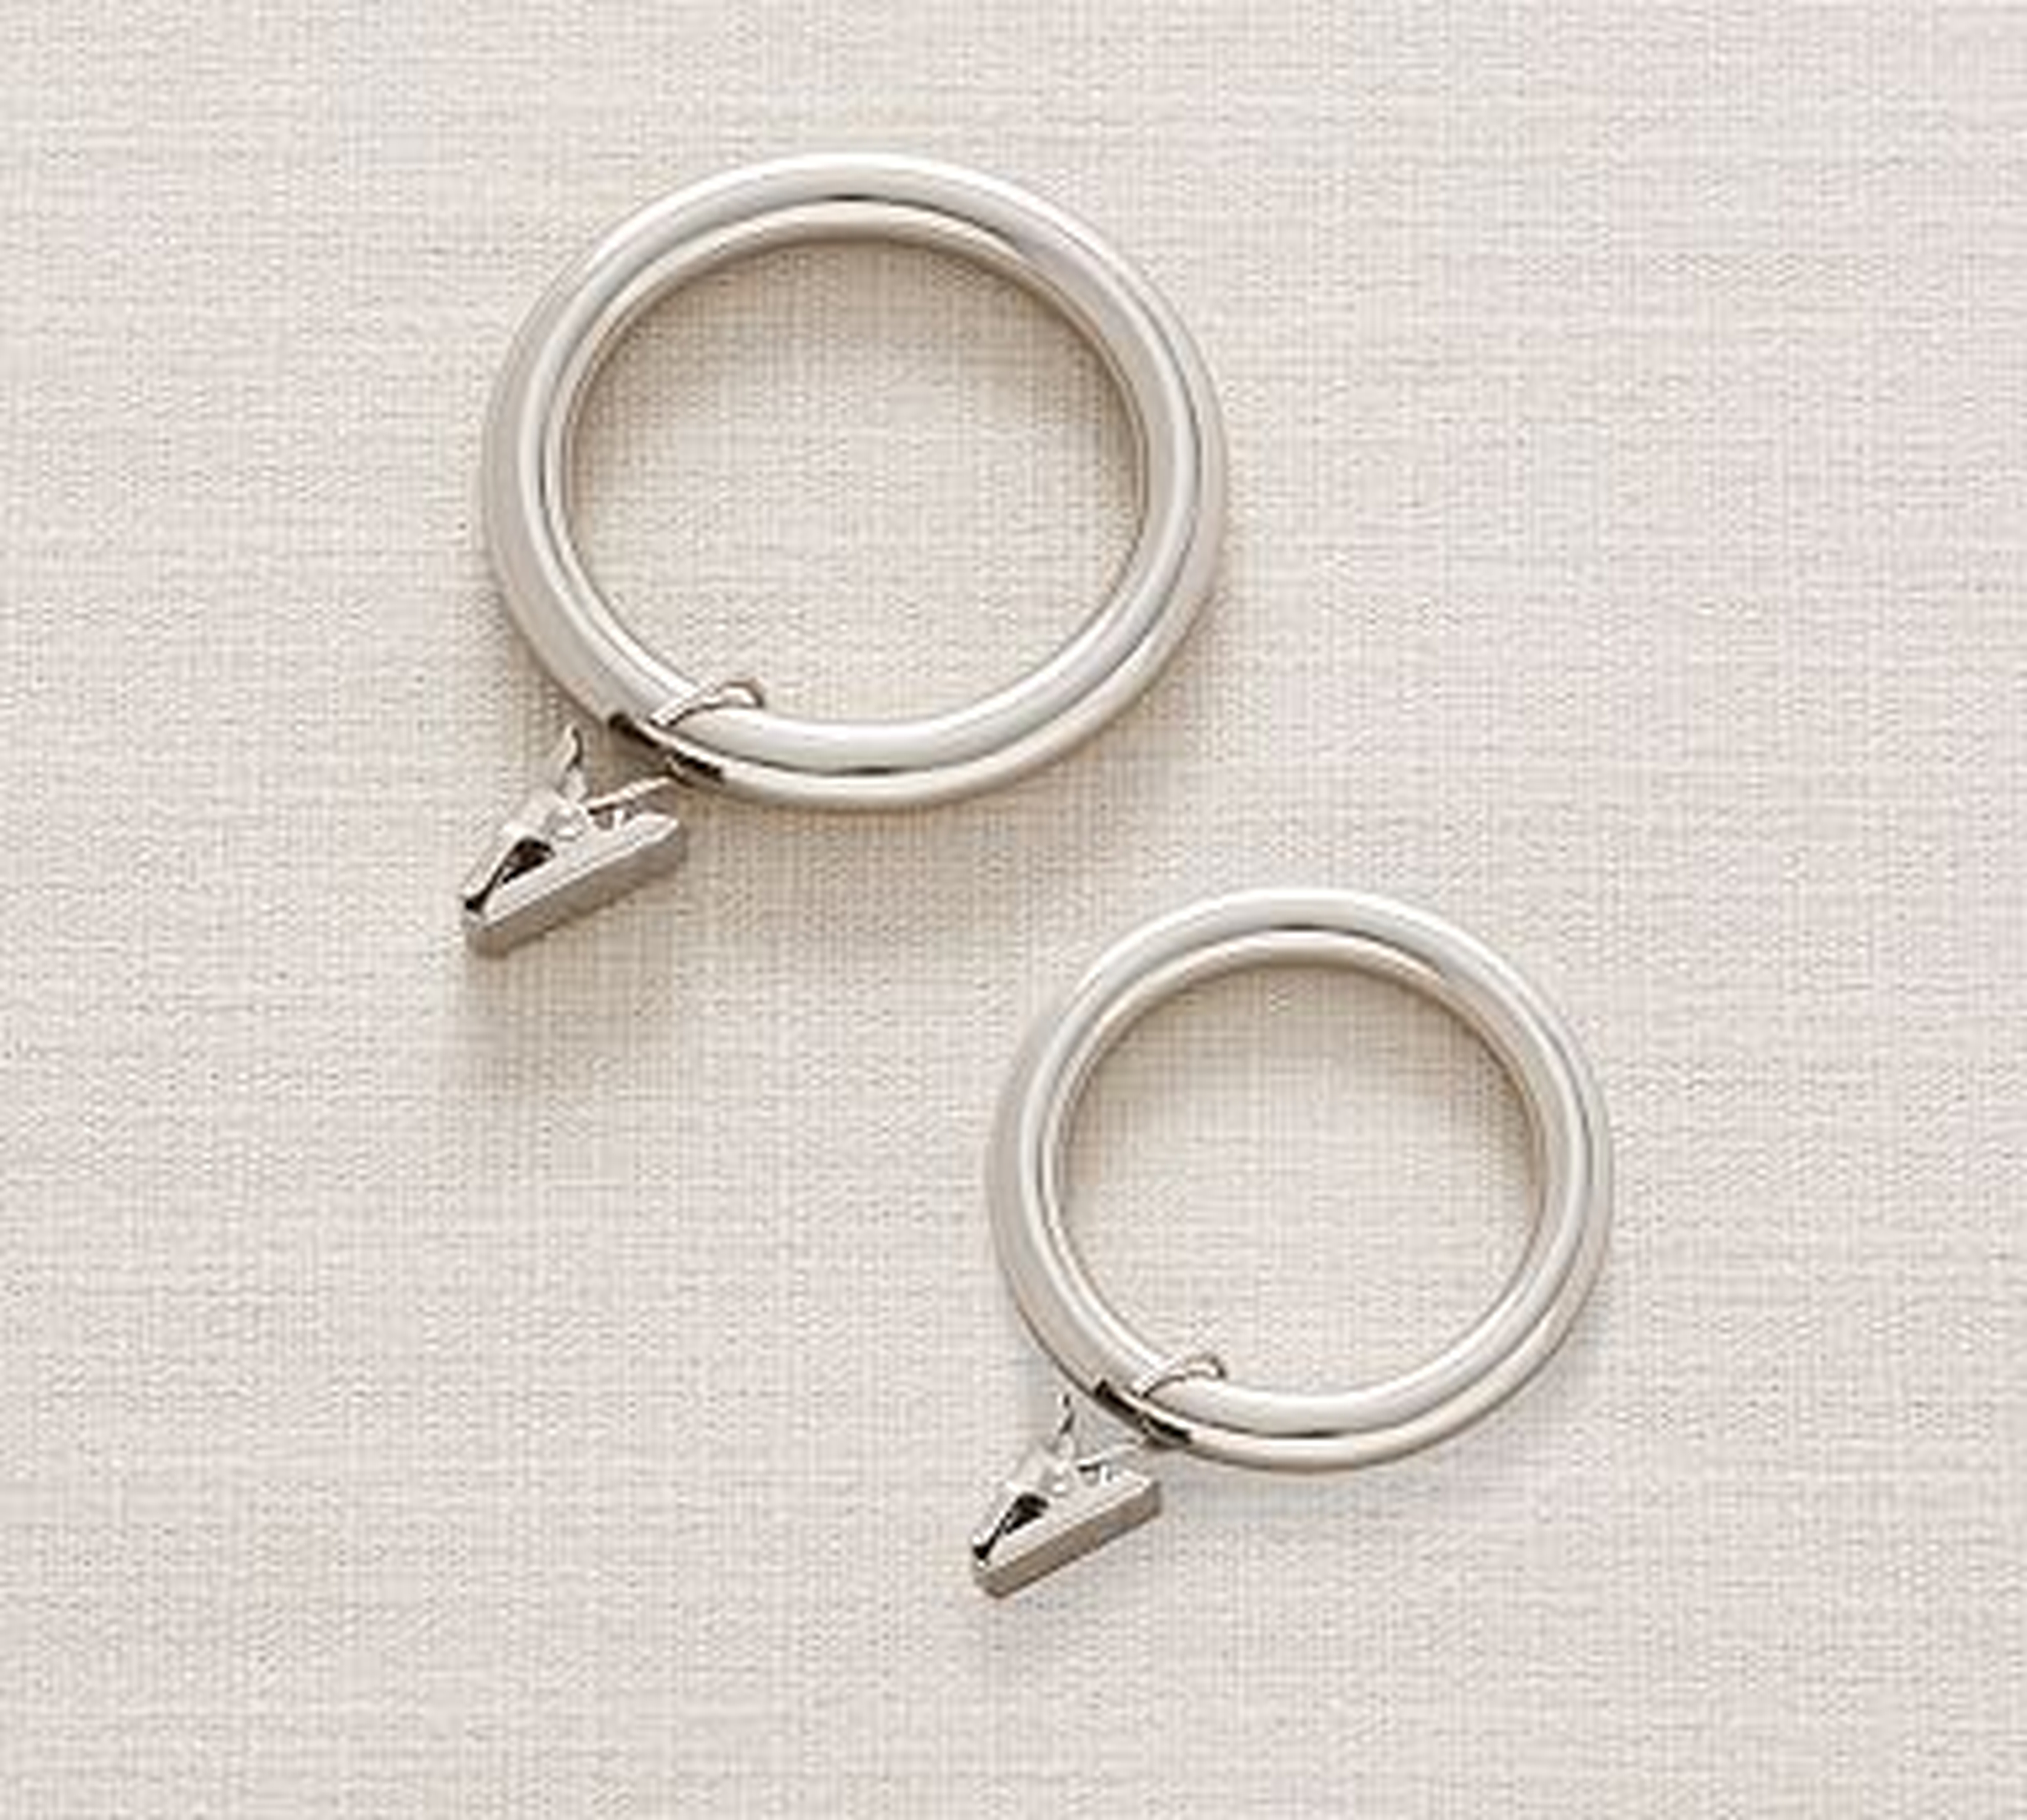 Single Curtain Clip Ring, Large, Polished Nickel Finish - Pottery Barn